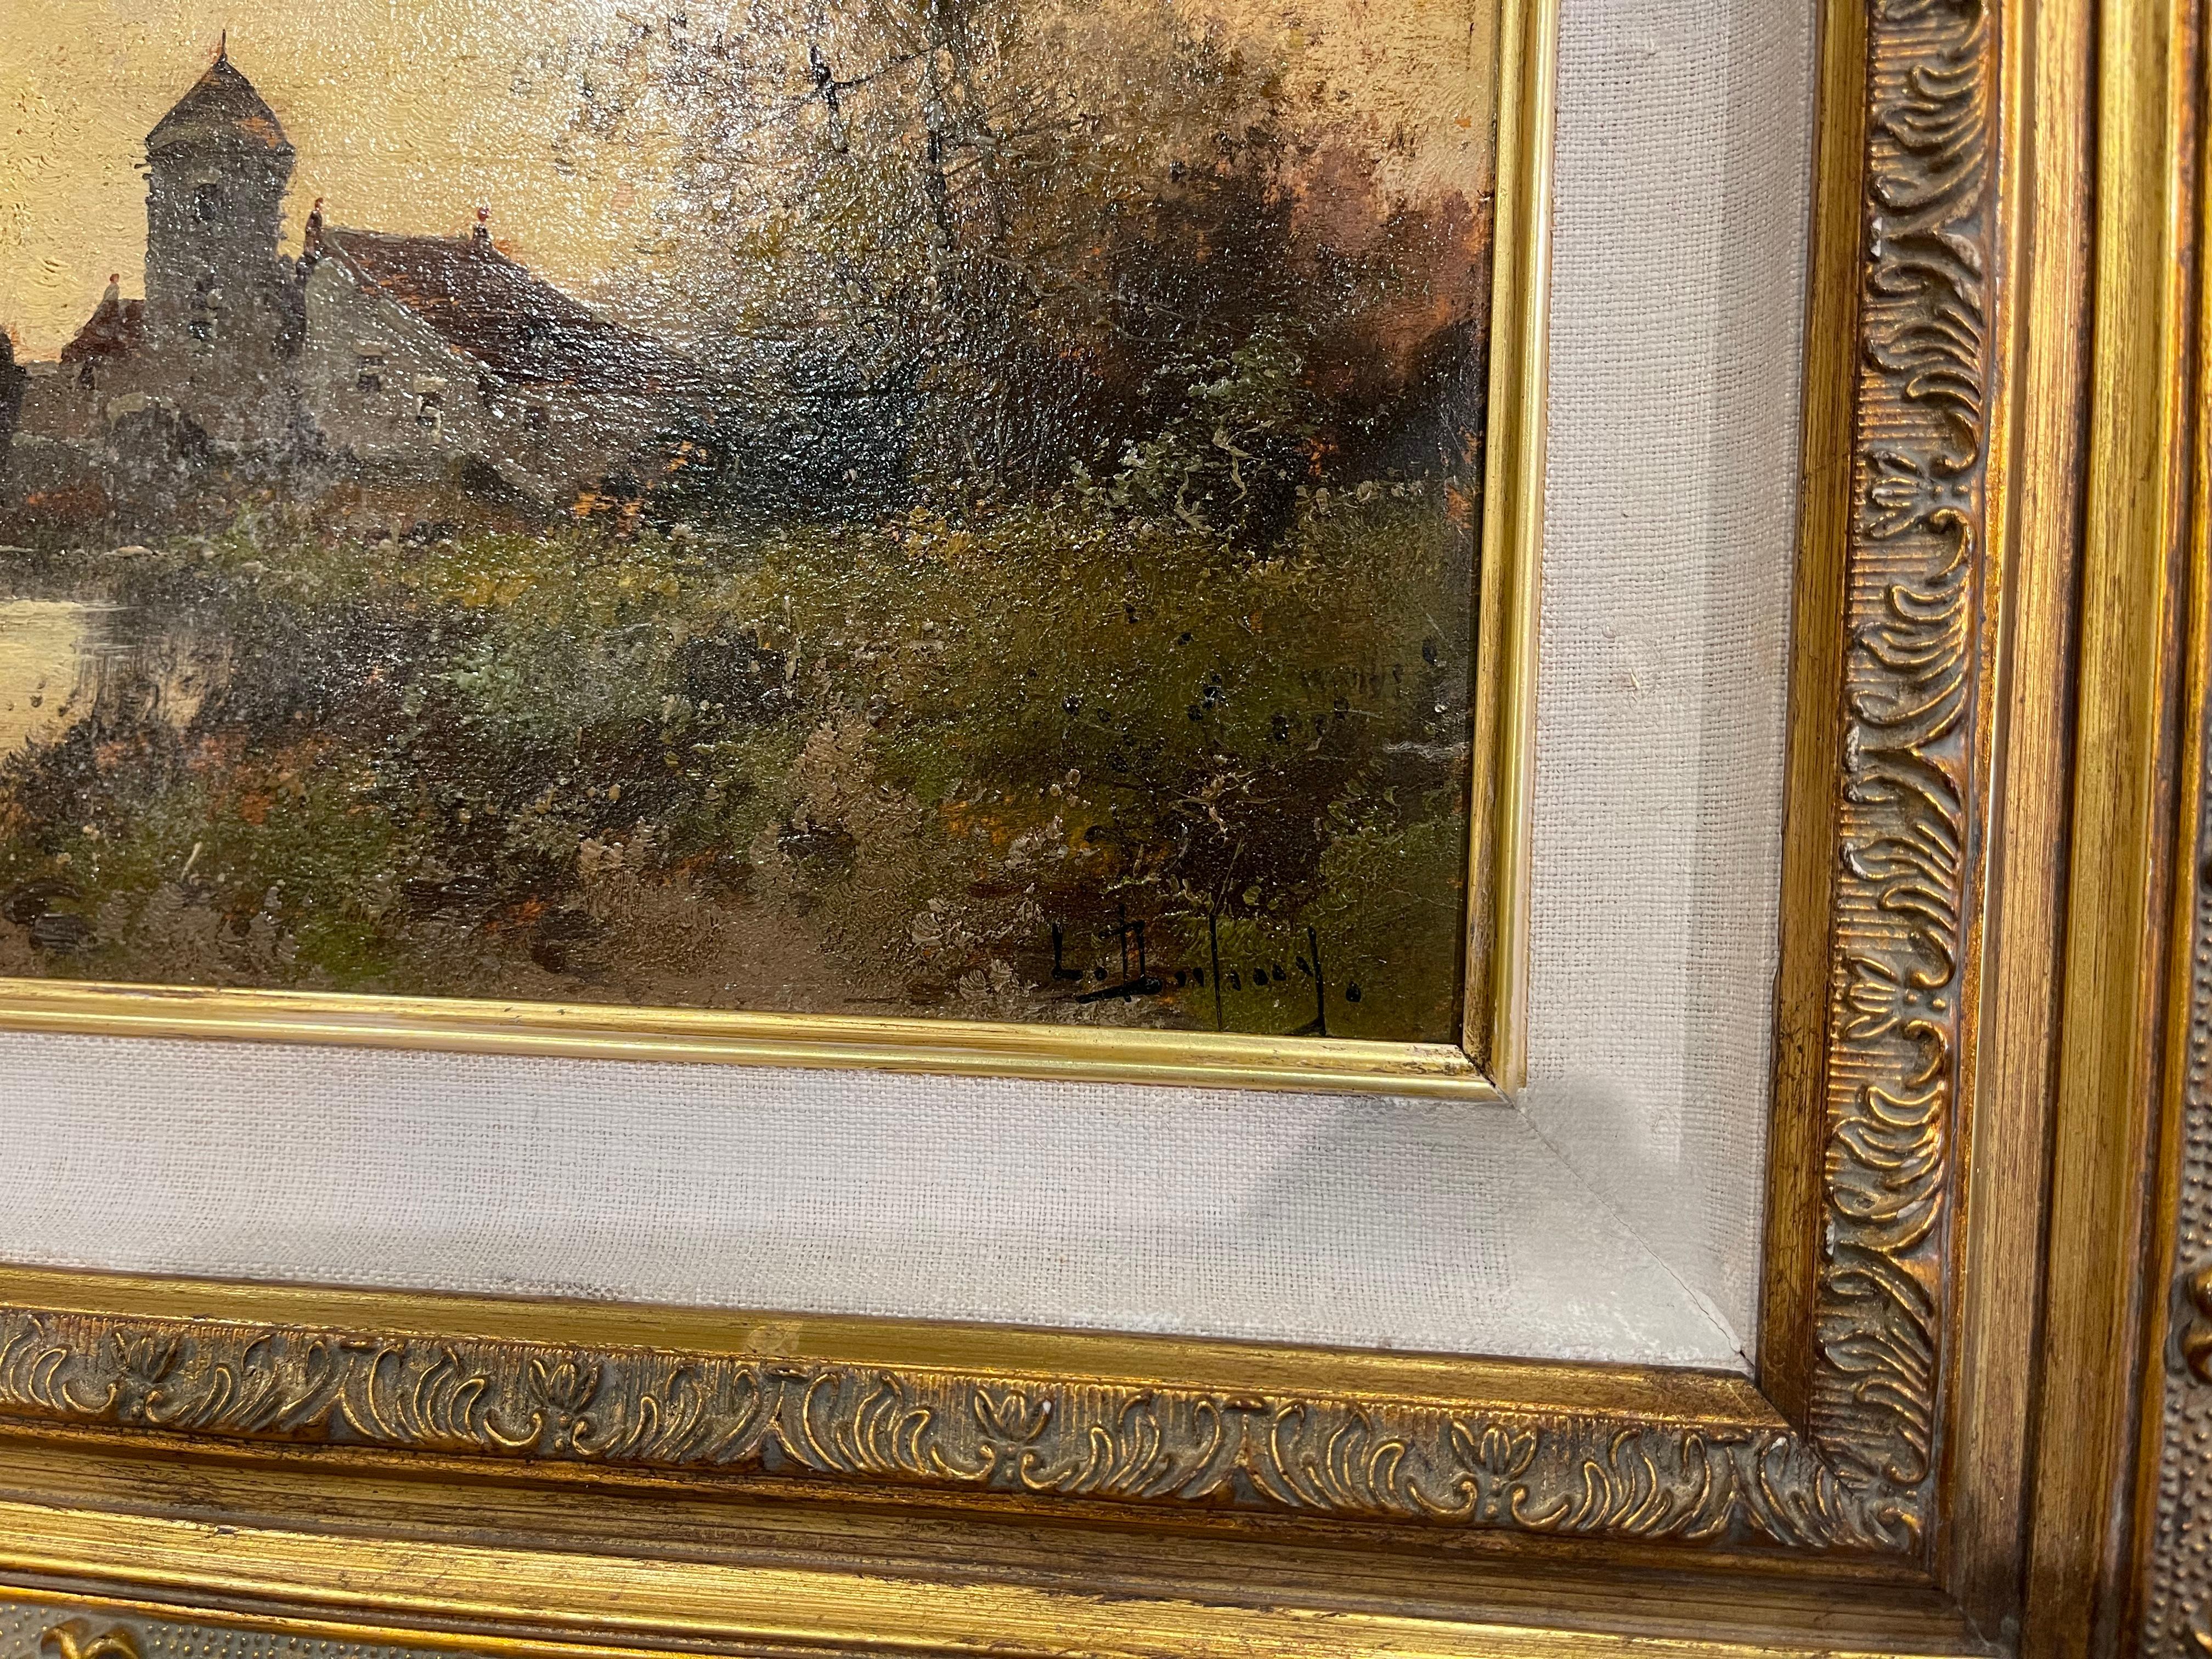 Set of 3 Framed Oil on Board Paintings Signed Leon Dupuy for E. Galien-Laloue For Sale 4